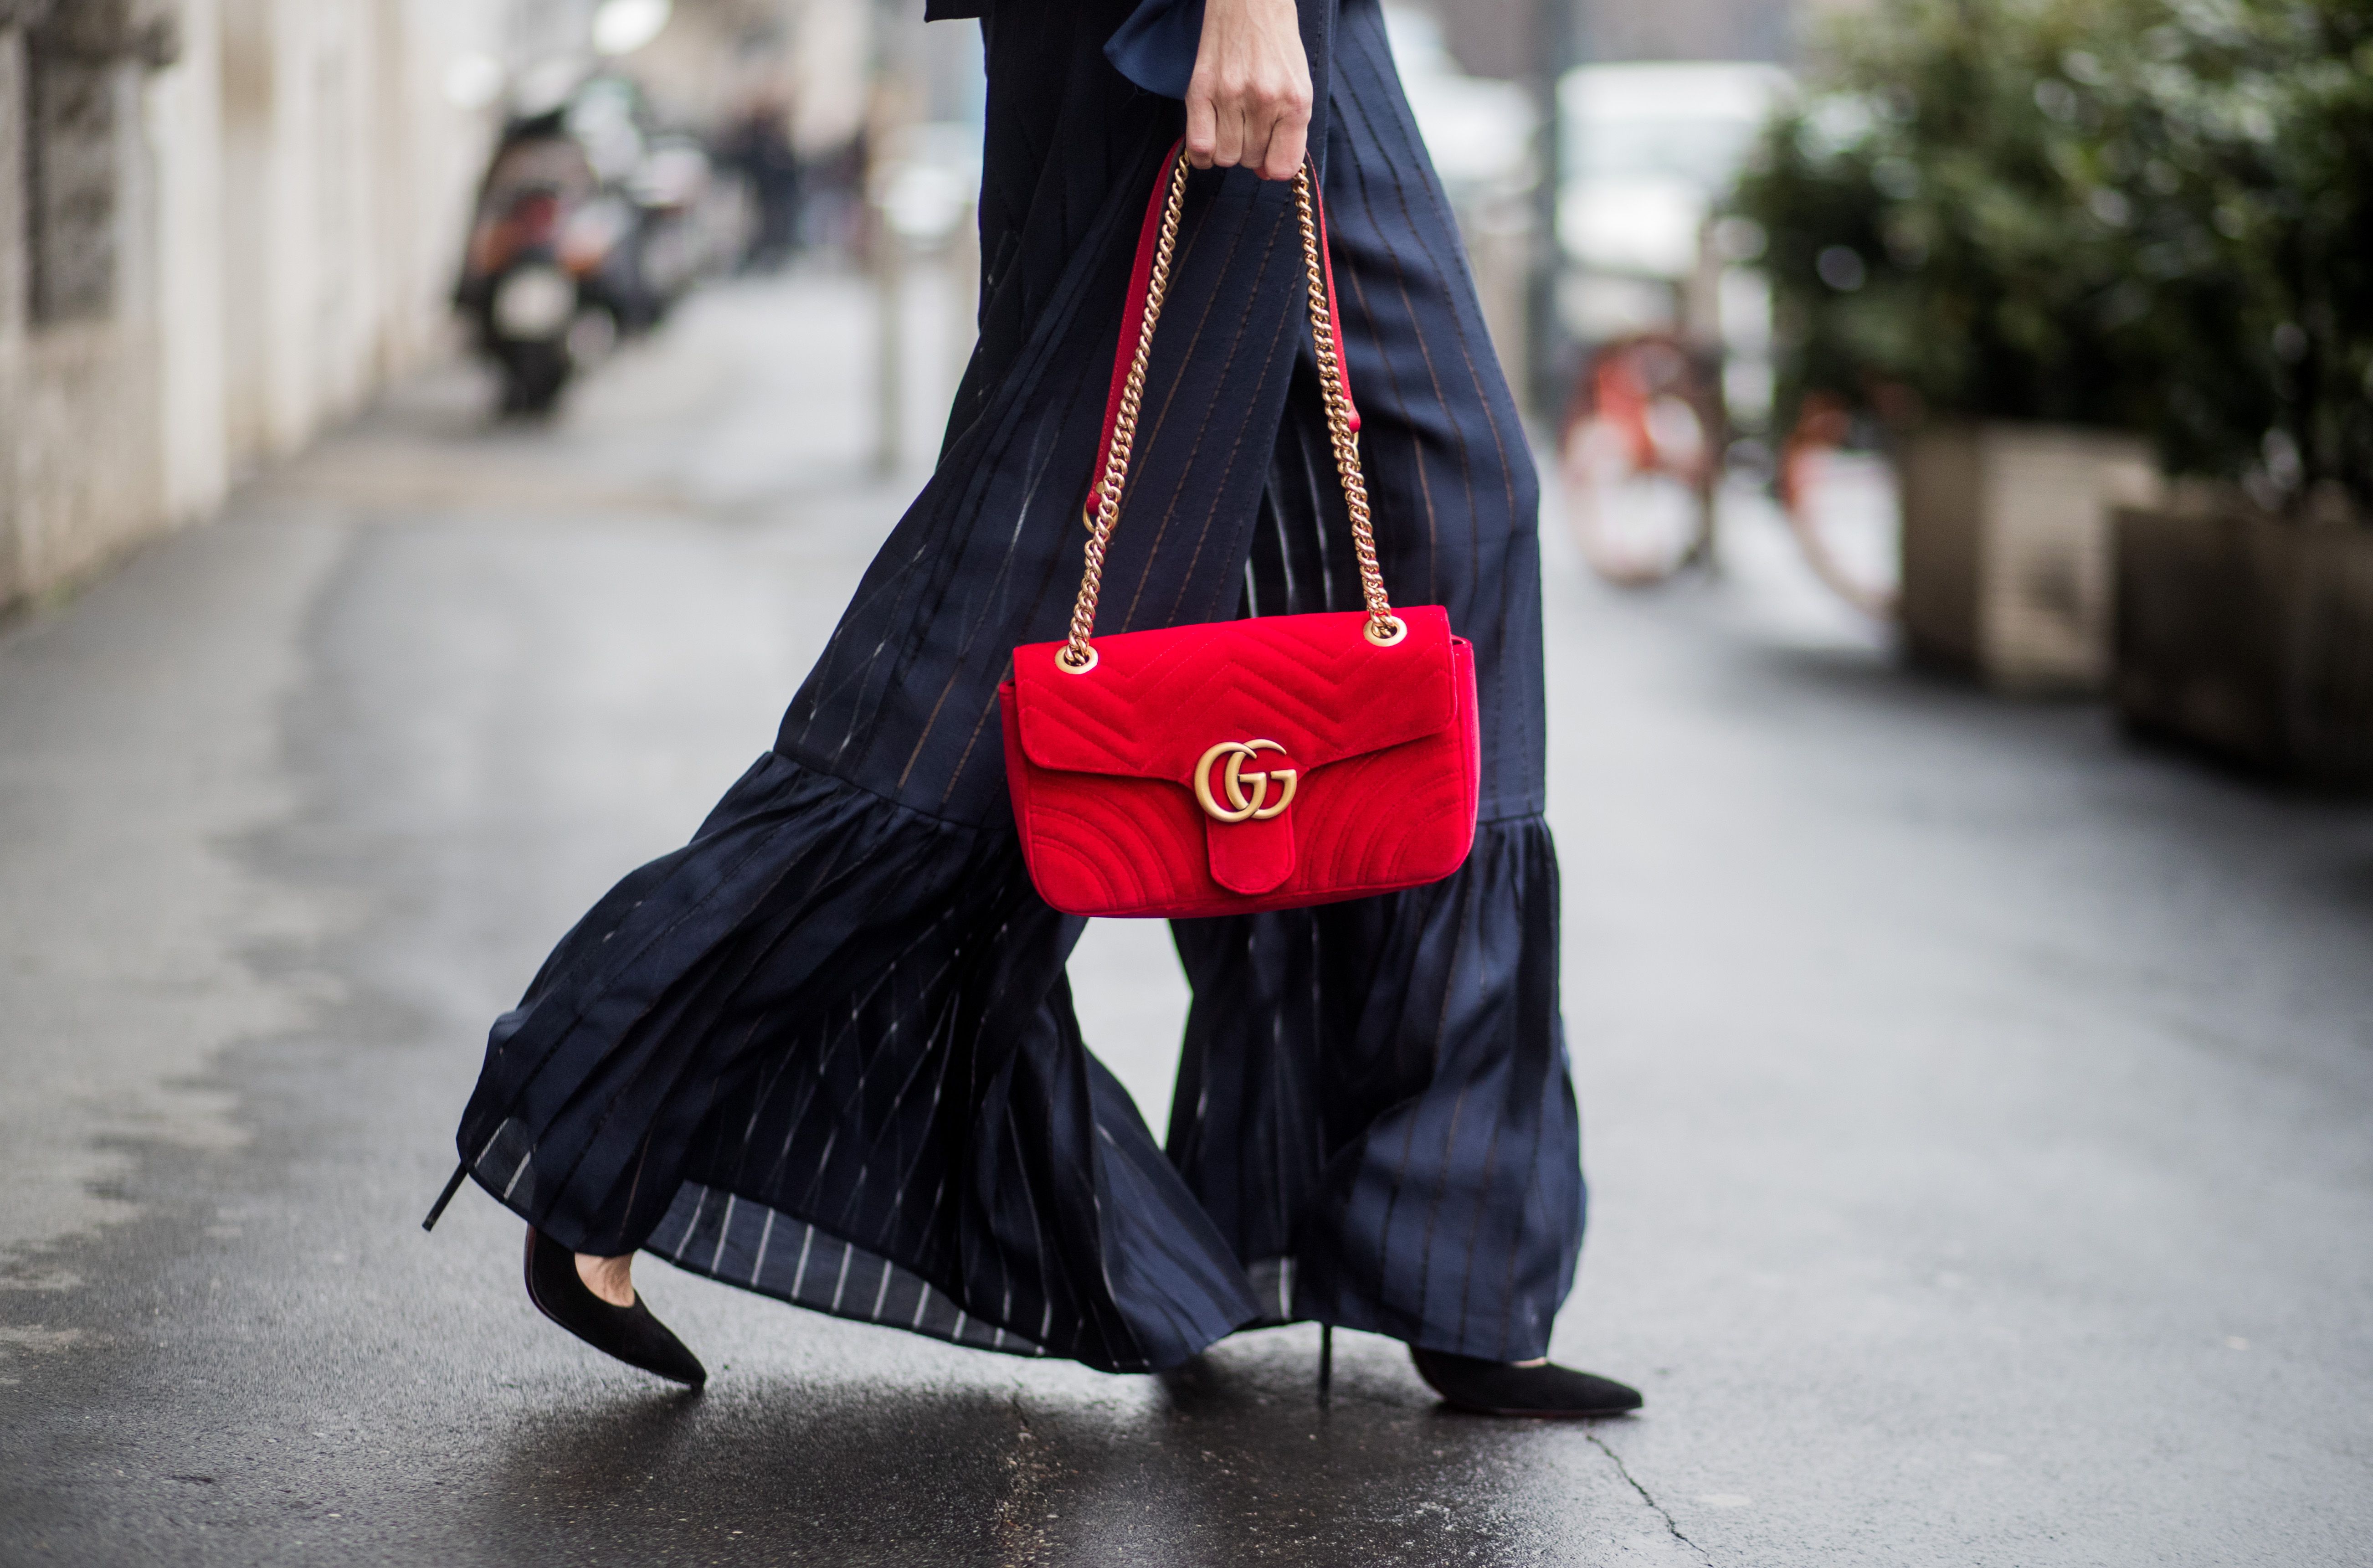 These are the five fashion items with the highest resale value